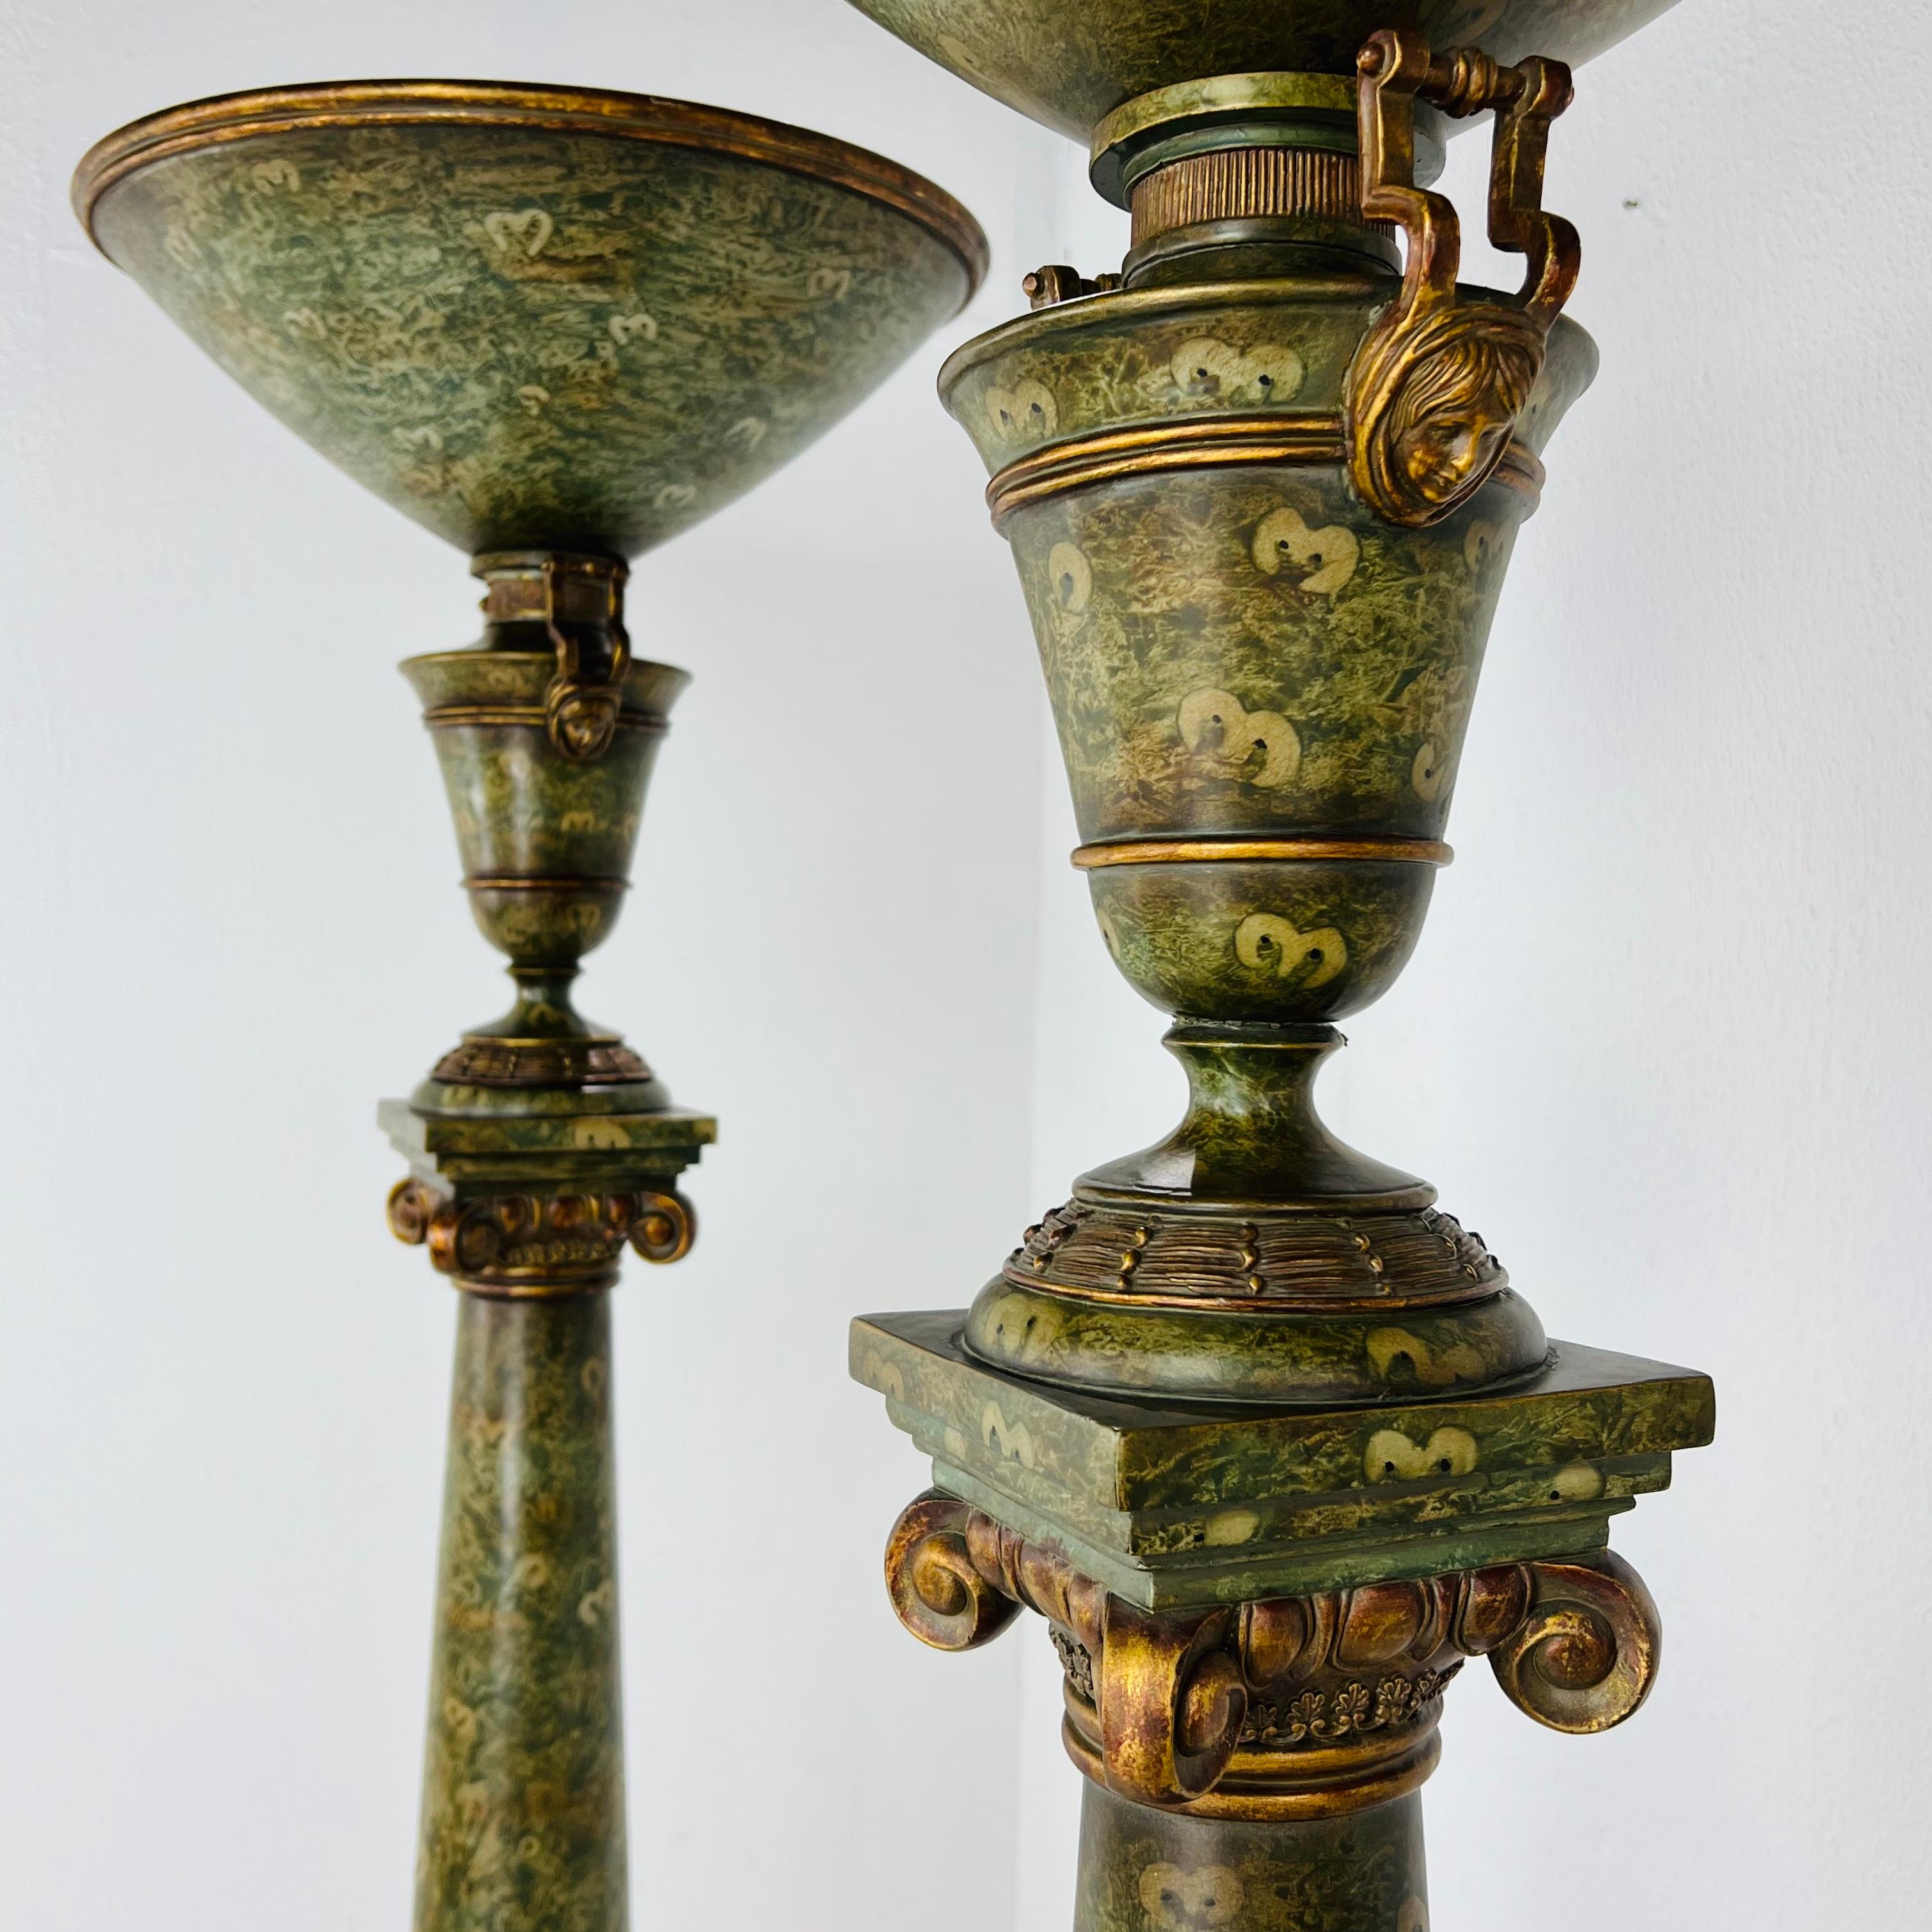 Pair of Monumental Venetian Torchiere Floor Lamps In Good Condition For Sale In Dallas, TX